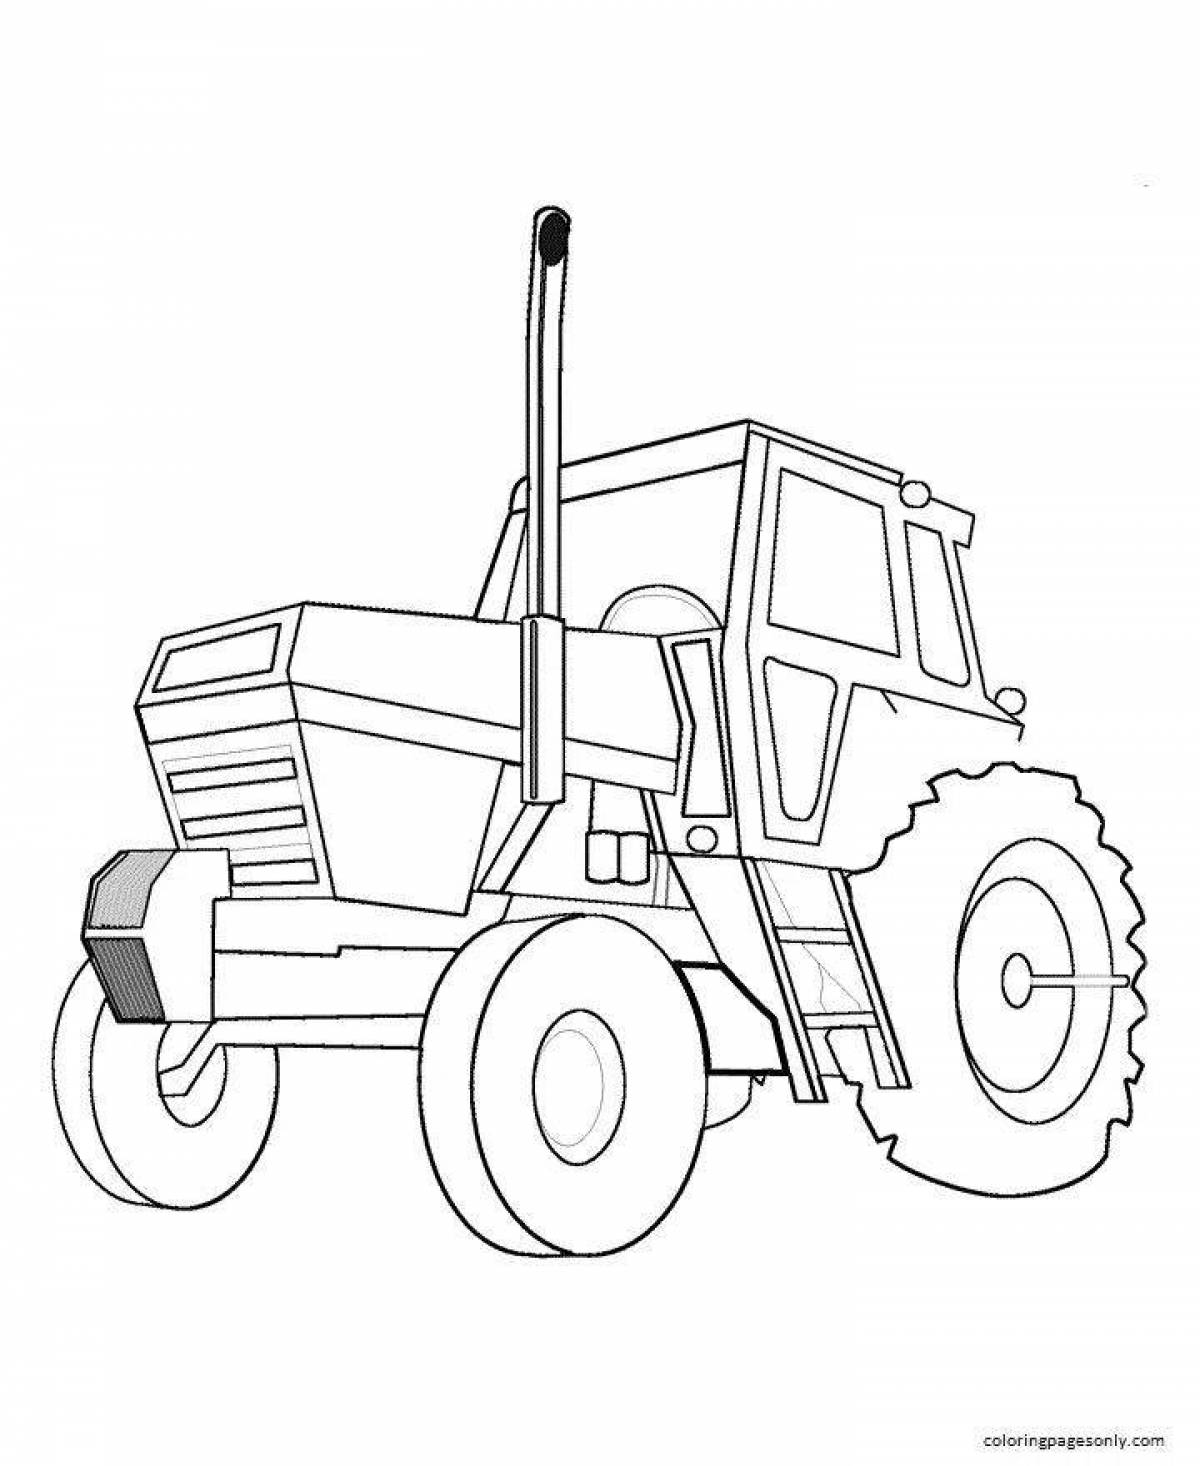 Fancy Belarusian tractor coloring page